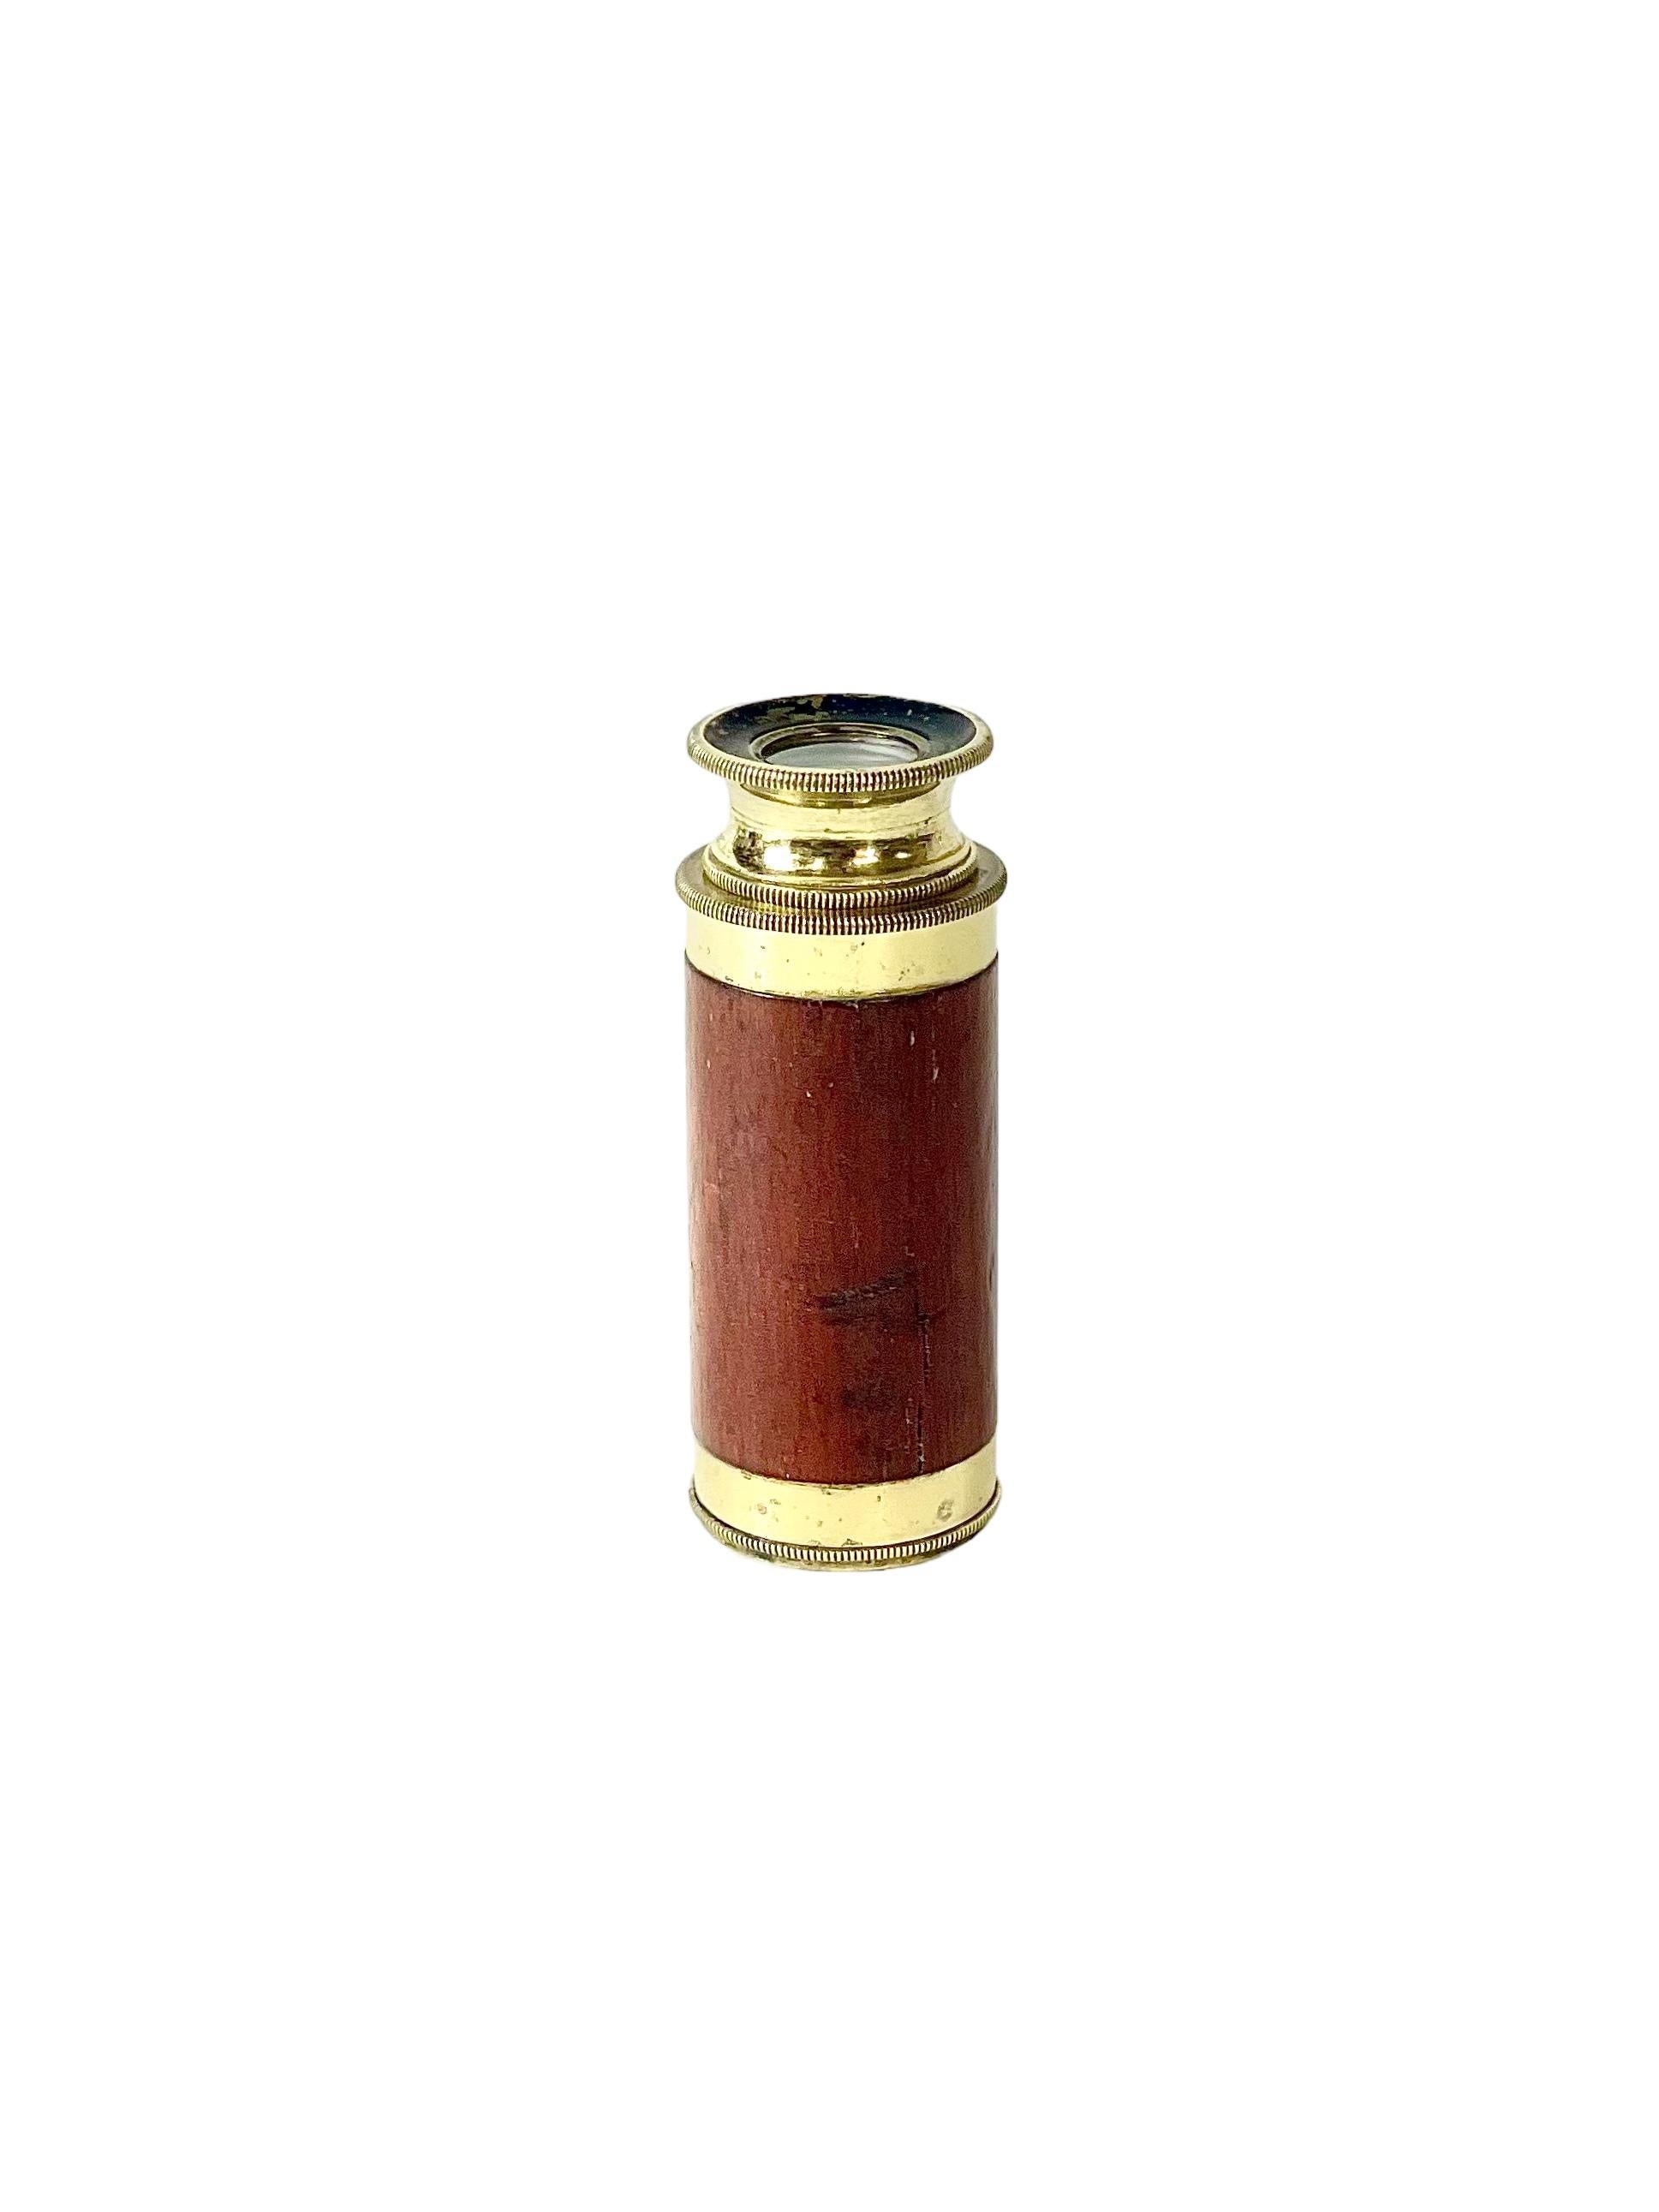 An antique French single draw telescope. Petite in size, its main barrel is covered with wonderful dark, veneer fruit wood, while the fixings and sliding drawer are gleaming brass. Designed to be hand-held, it is likely that this beautiful spy glass